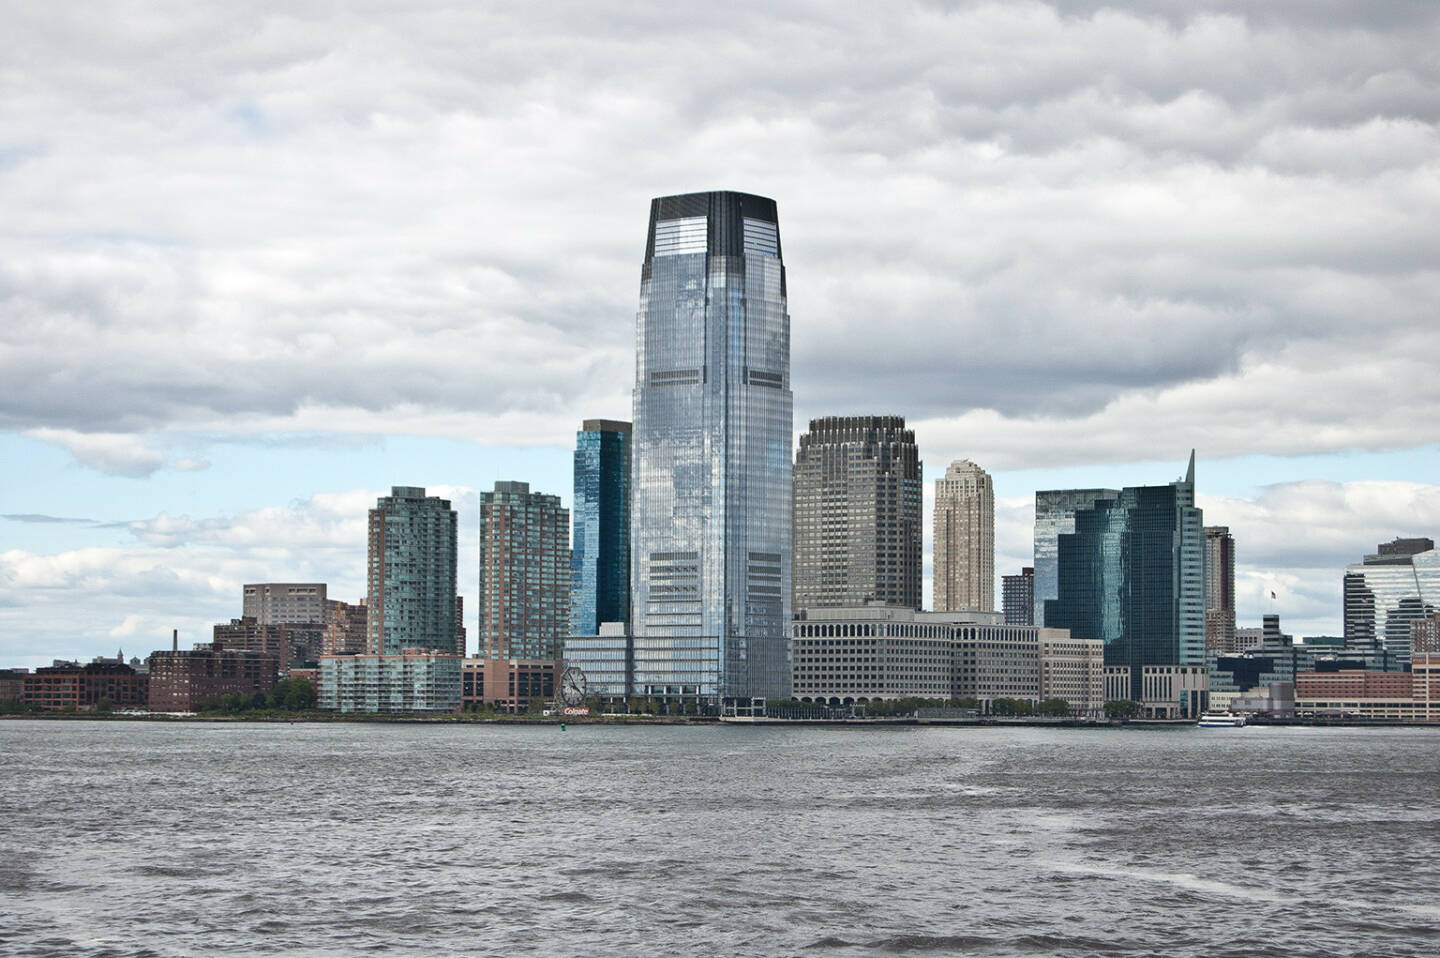 Goldman Sachs Tower, Jersey City, http://www.shutterstock.com/de/pic-68405743/stock-photo-goldman-sachs-tower-jersey-city-build-in-the-tallest-building-in-new-jersey.html